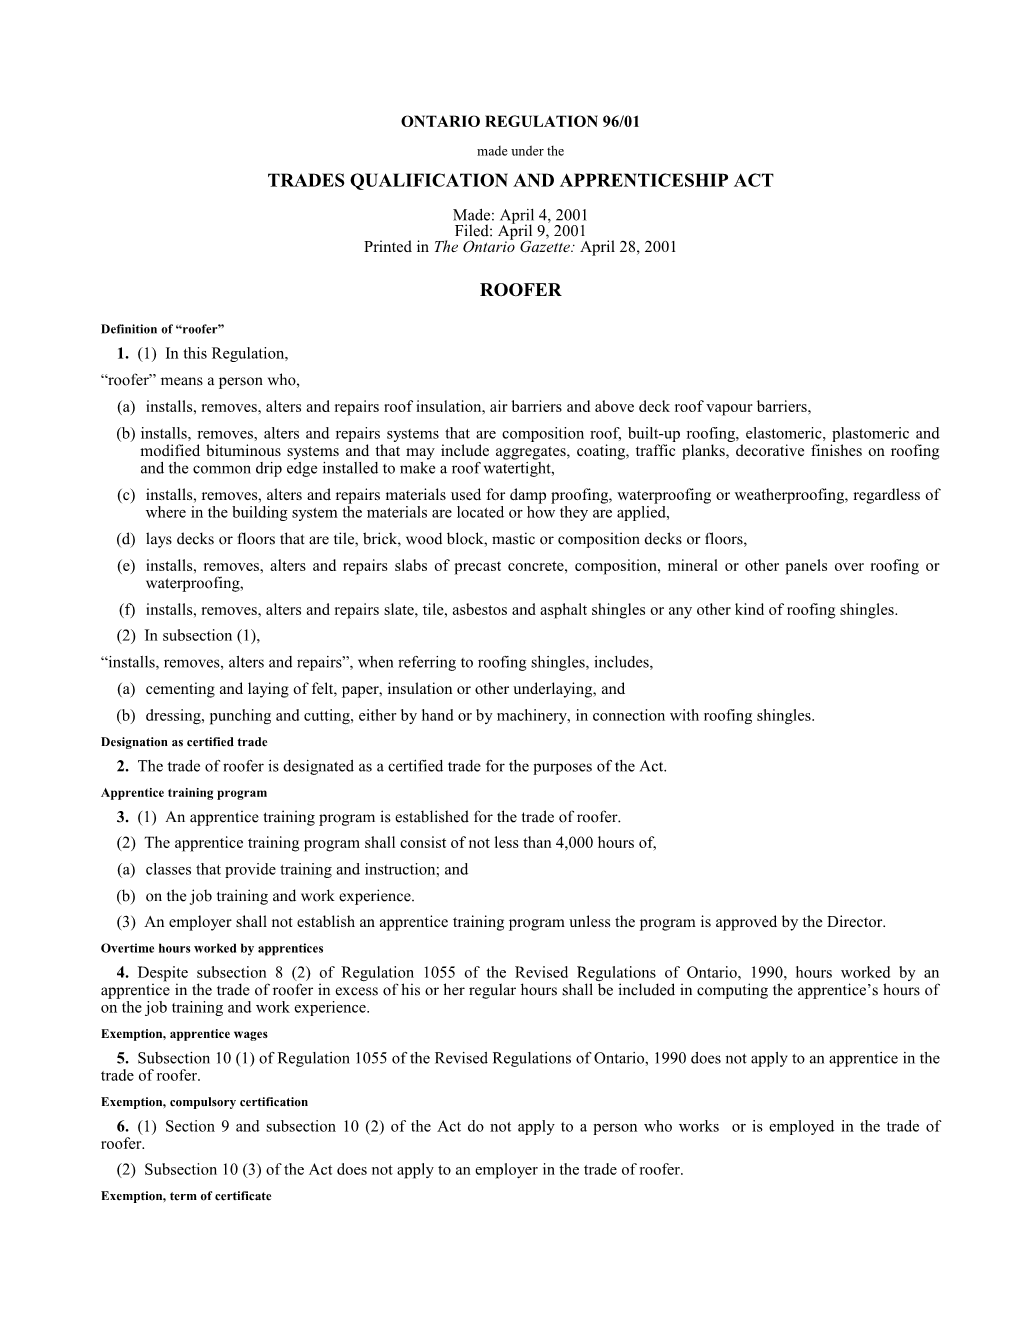 TRADES QUALIFICATION and APPRENTICESHIP ACT - O. Reg. 96/01